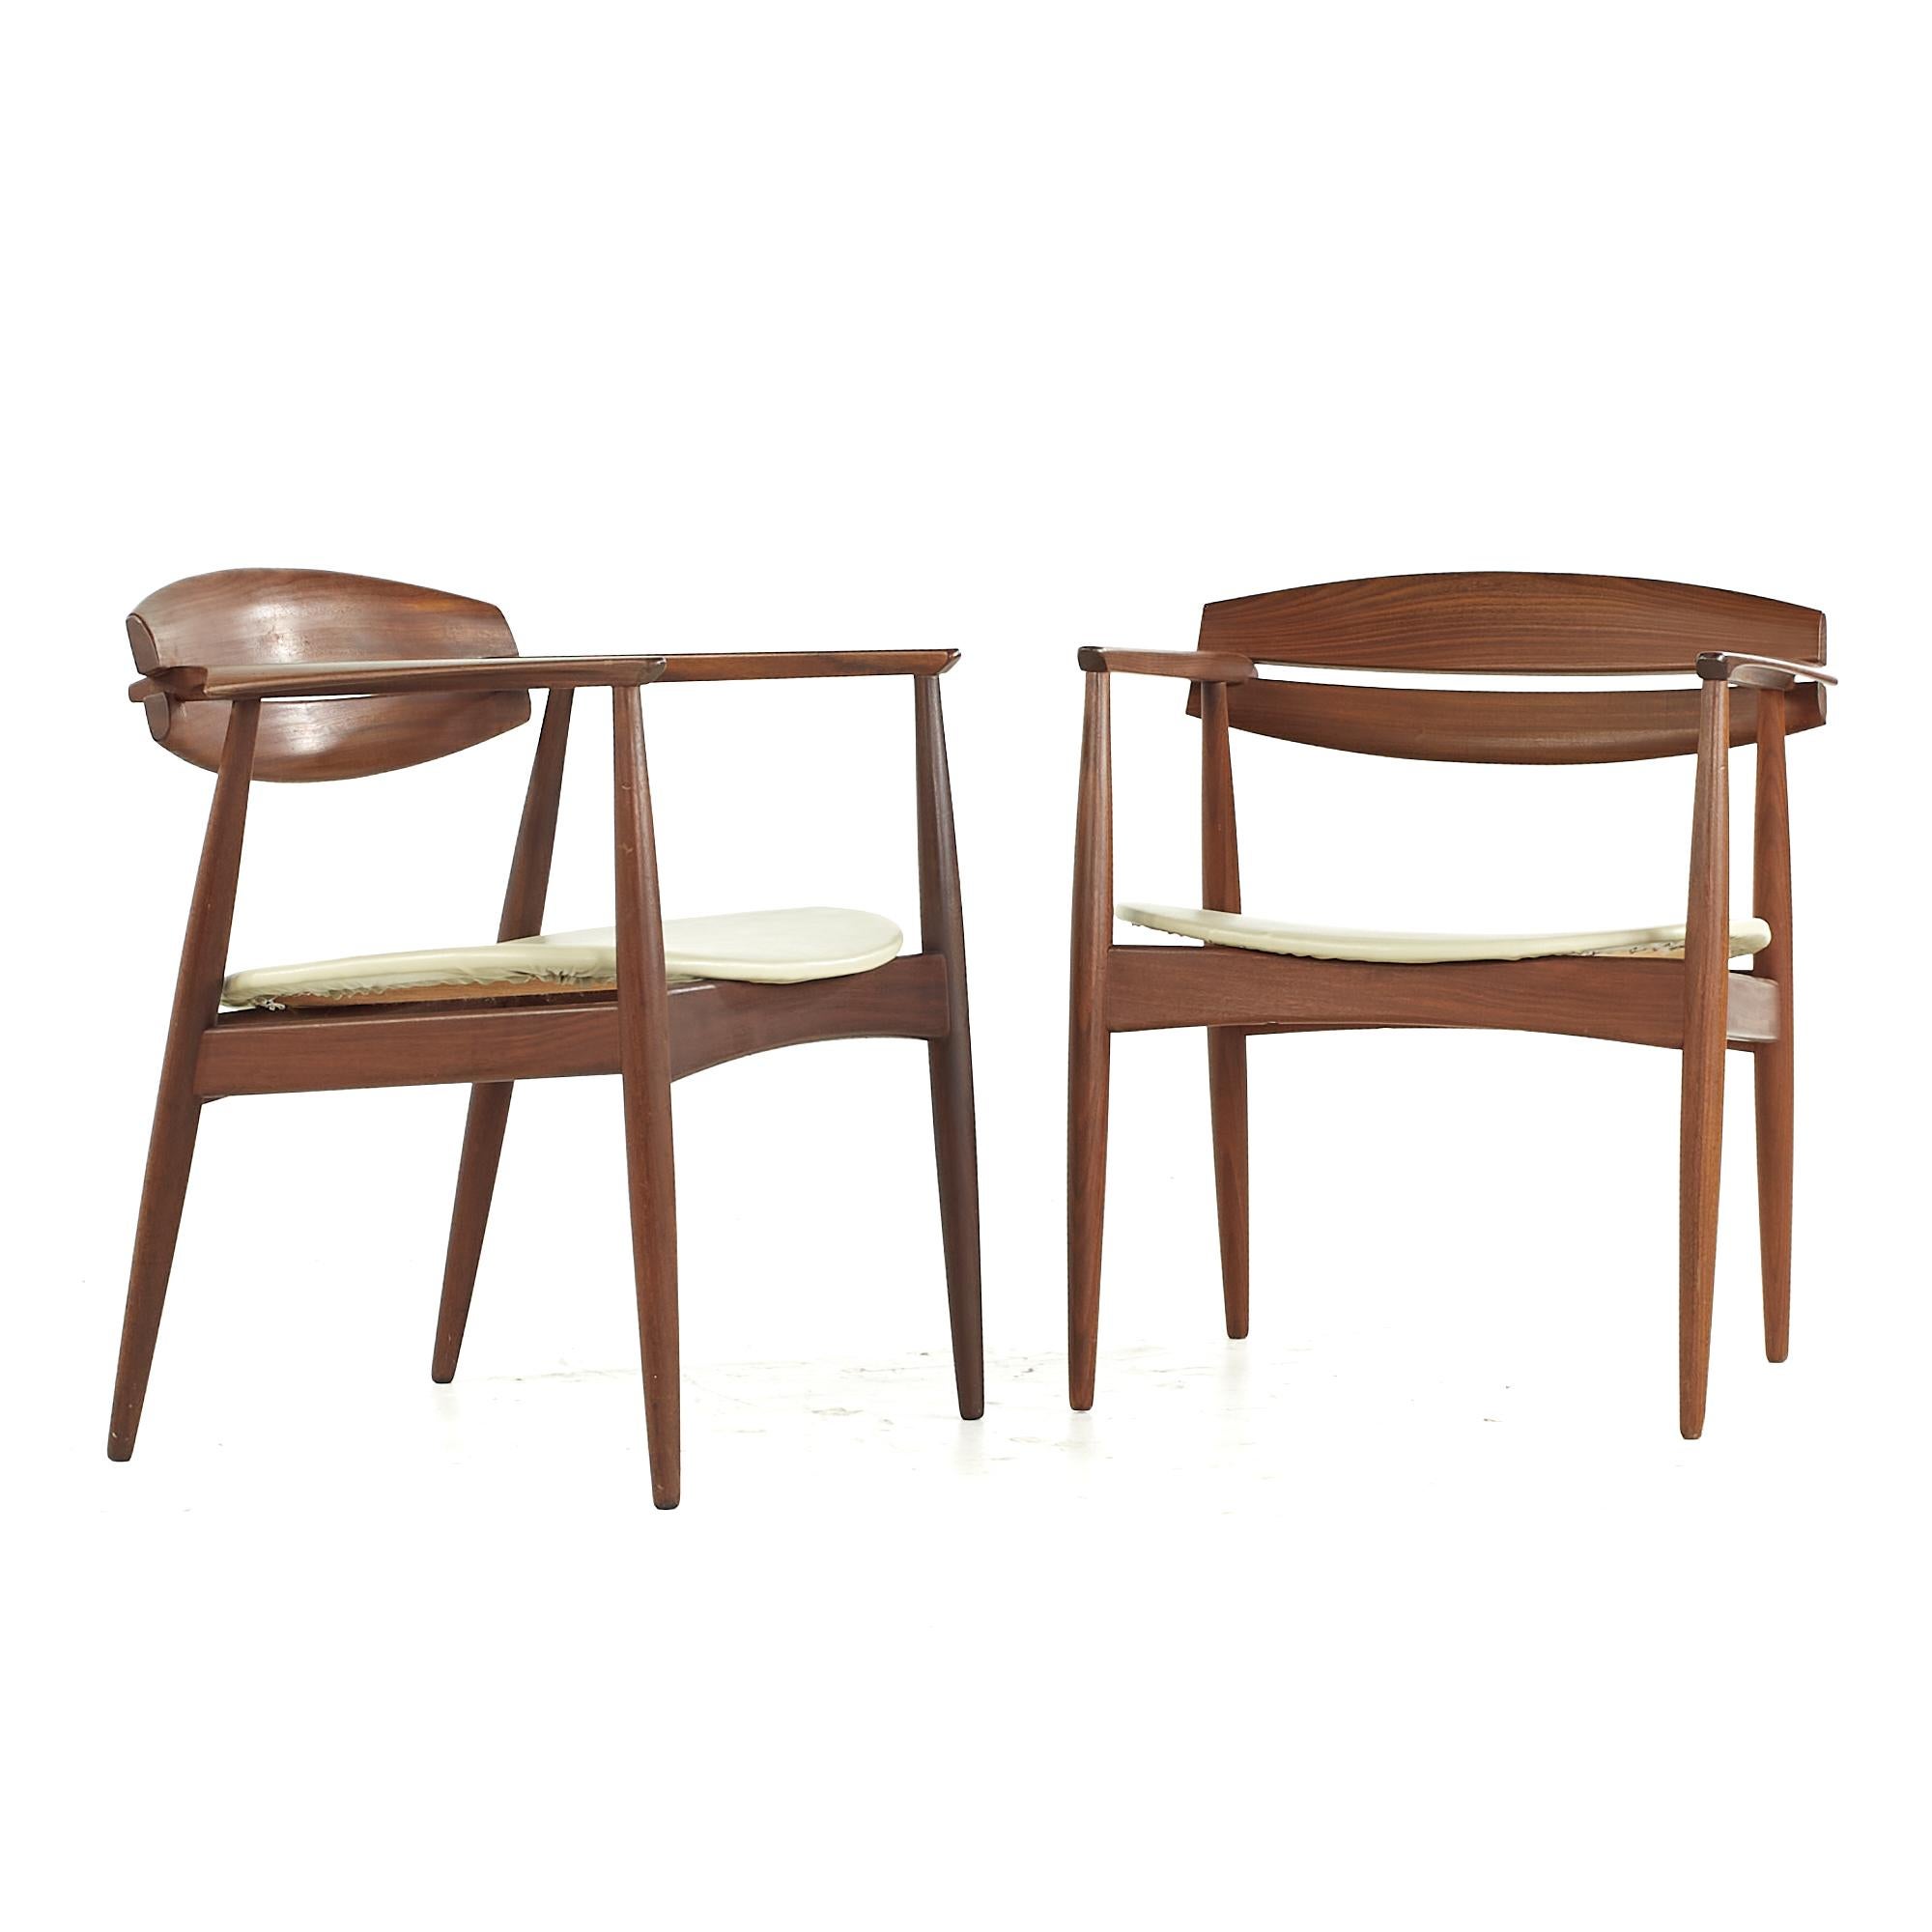 John Sylvester & Jørgen Matz for Bramin Mobler Mid Century Rosewood Arm Chairs - Pair

Each chair measures: 24.5 wide x 21 deep x 28 inches high, with a seat height of 16 and arm height/chair clearance of 24.25 inches

All pieces of furniture